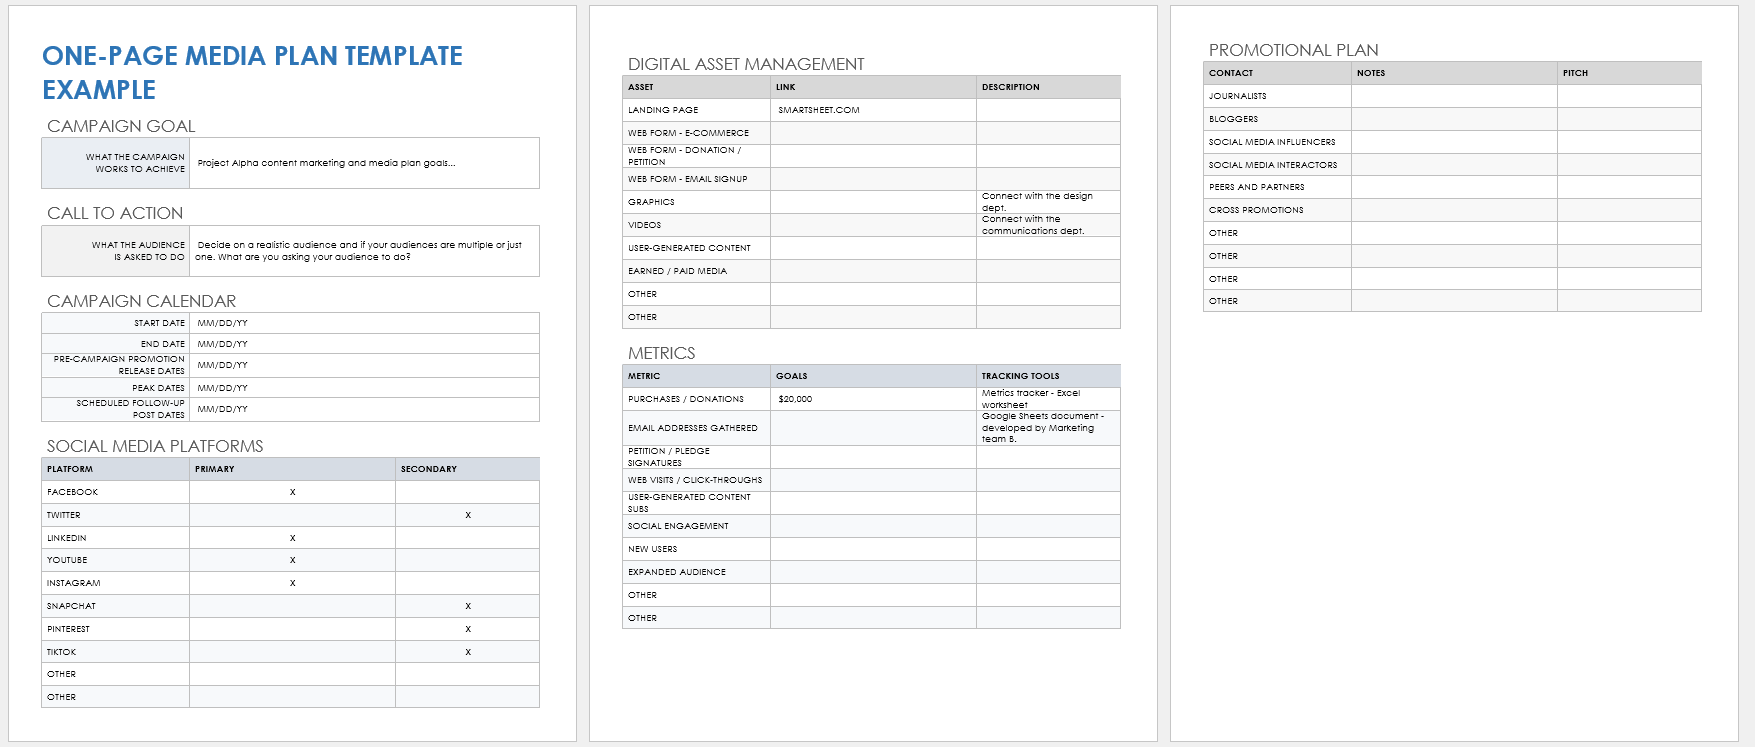 One-Page Media Plan Example Template